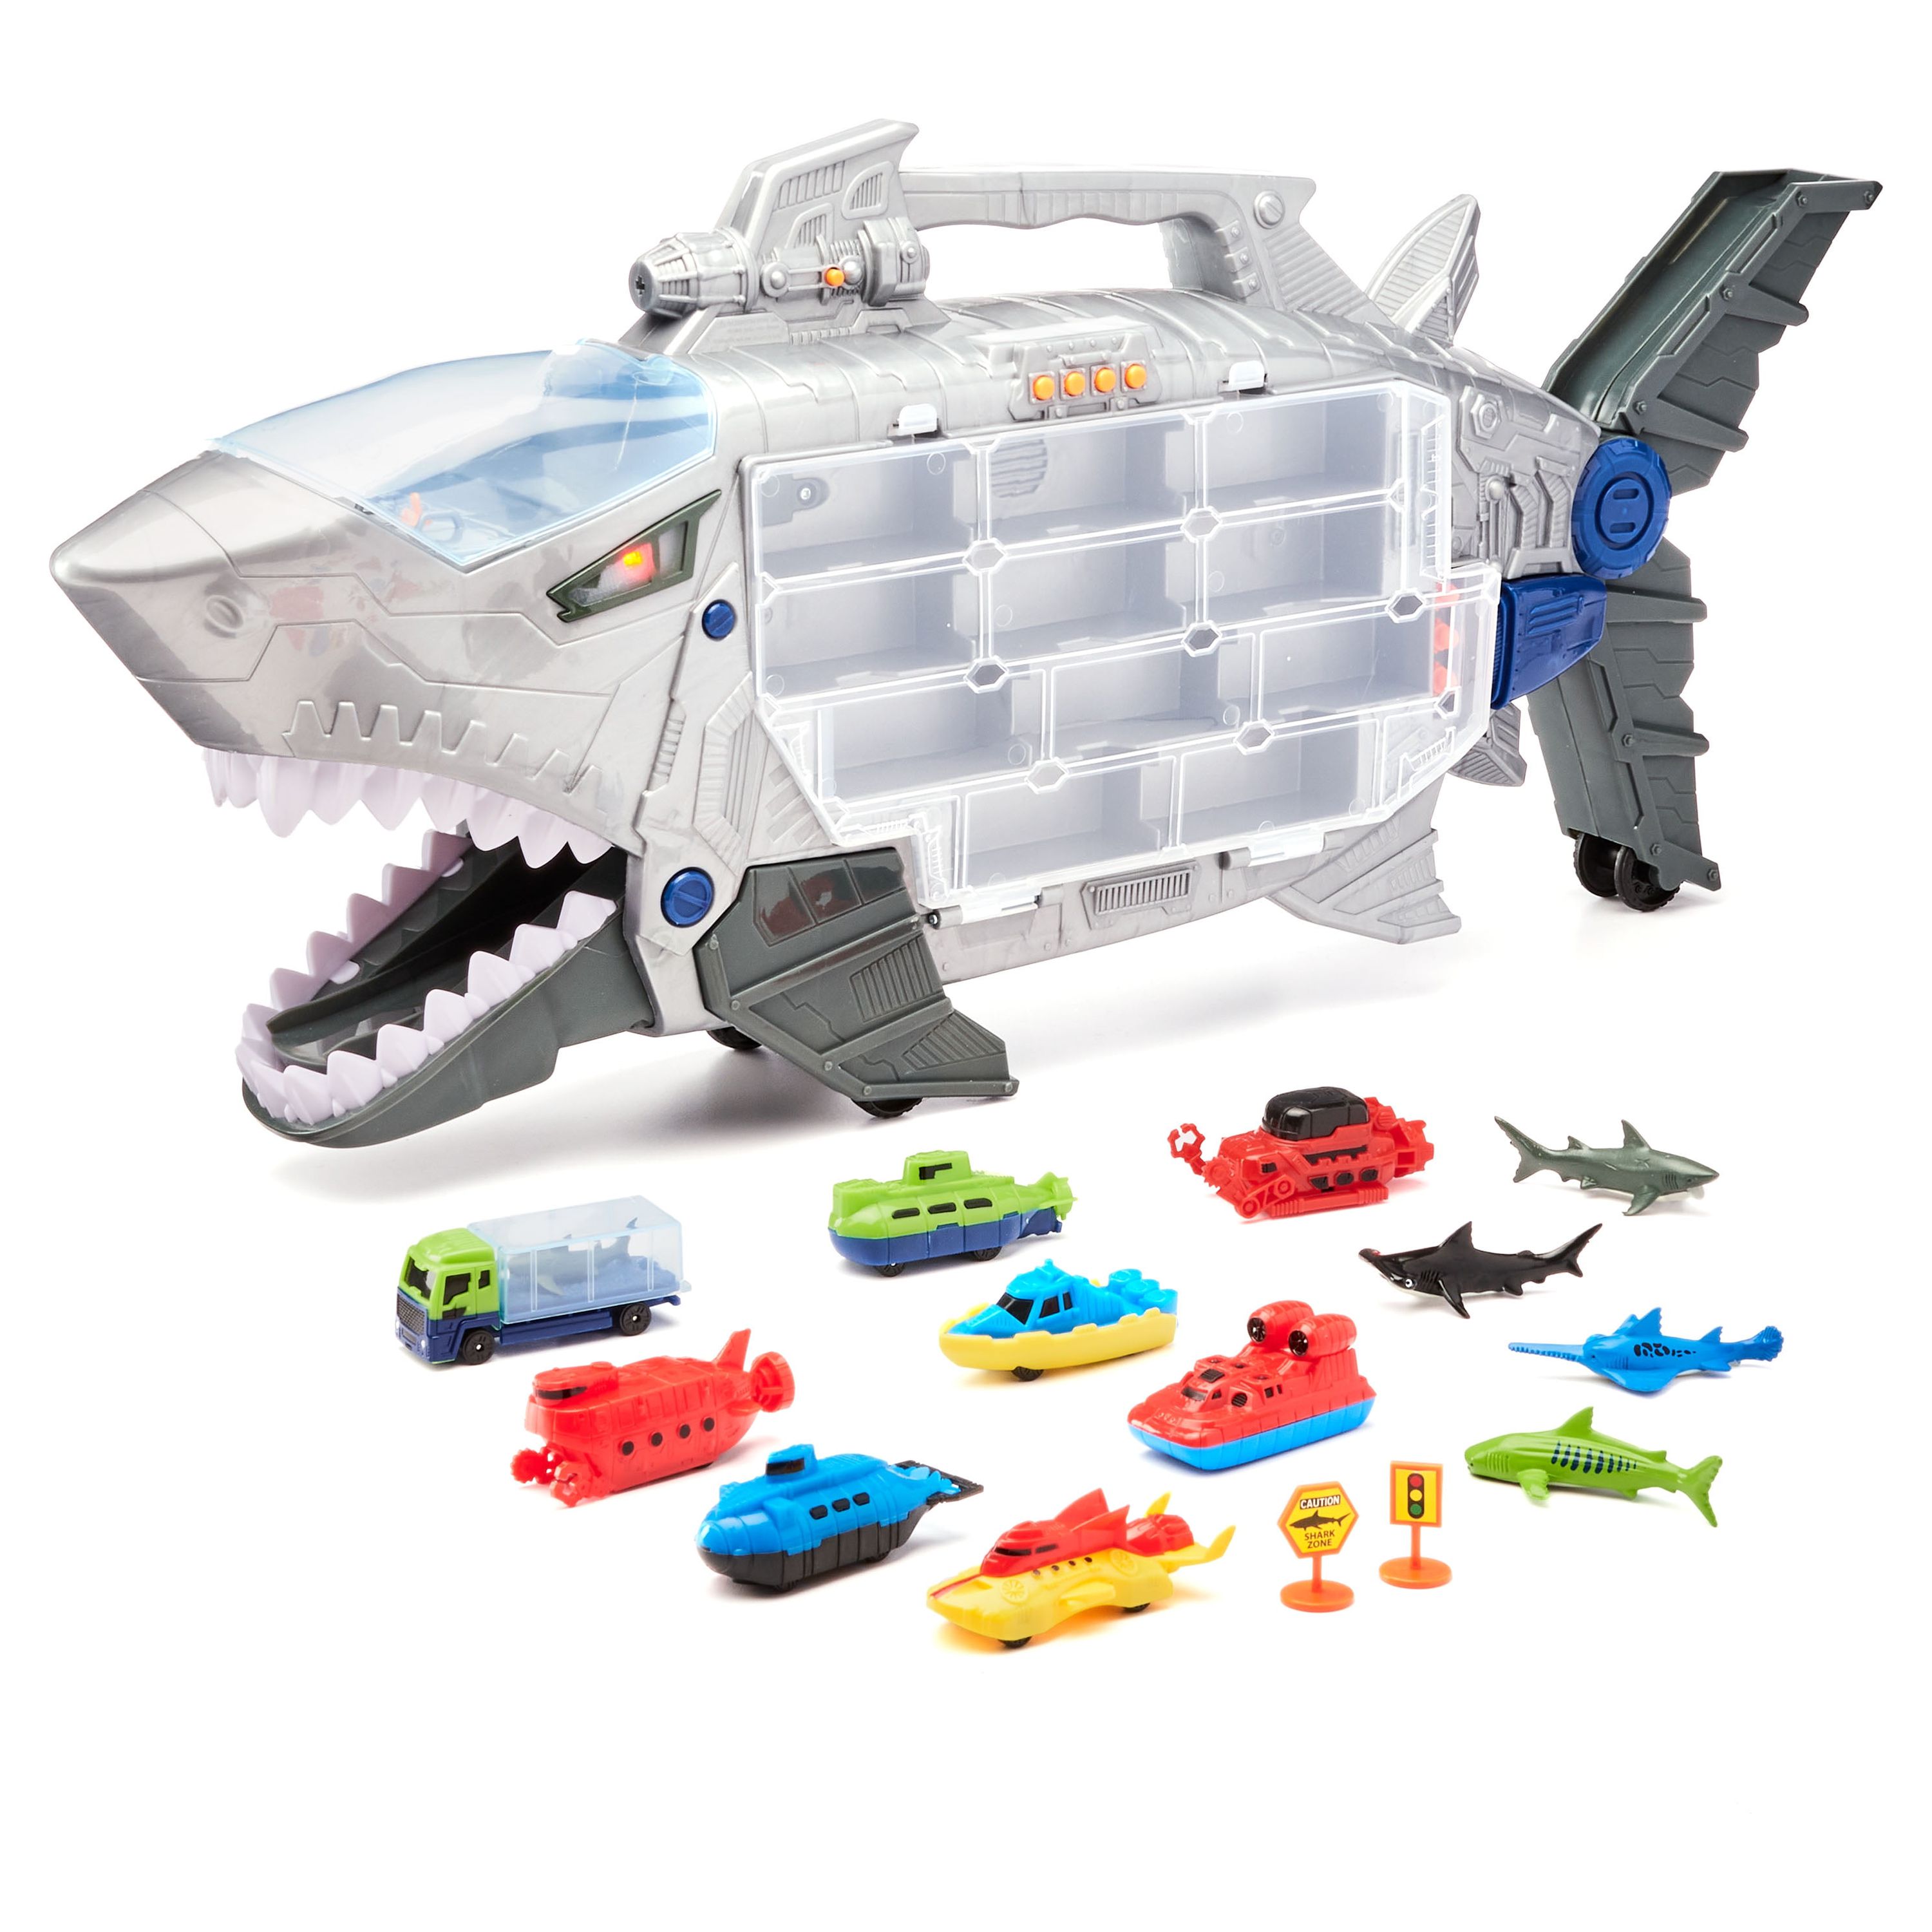 Kid Connection Shark Figure and Vehicle Transporter Play Set, 18 Pieces - image 1 of 6